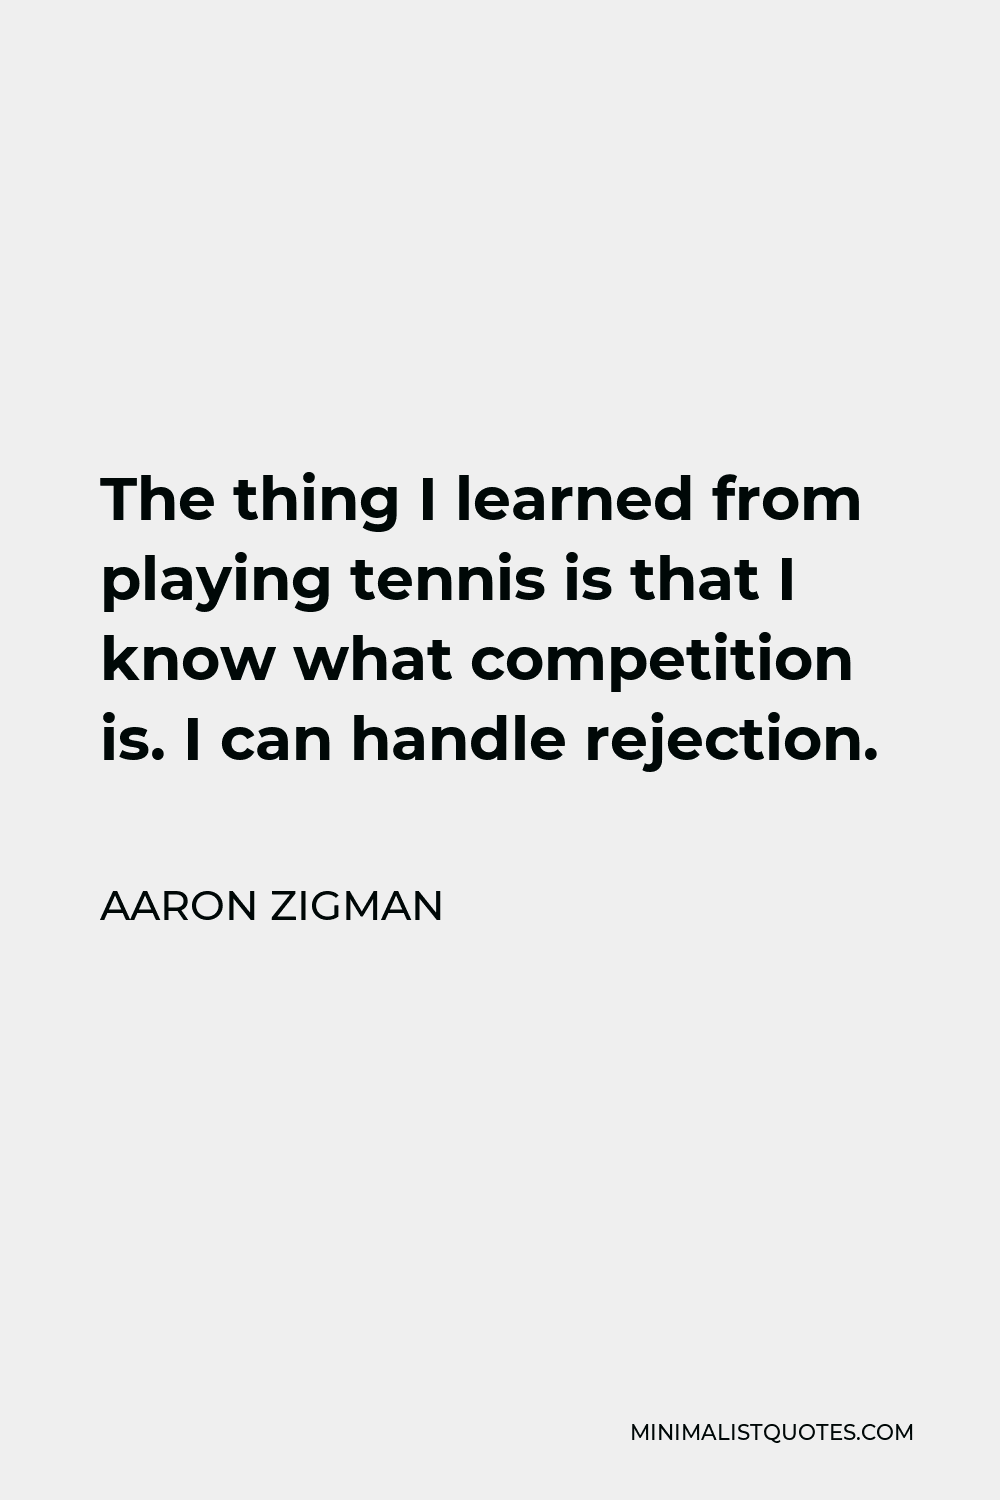 Aaron Zigman Quote - The thing I learned from playing tennis is that I know what competition is. I can handle rejection.